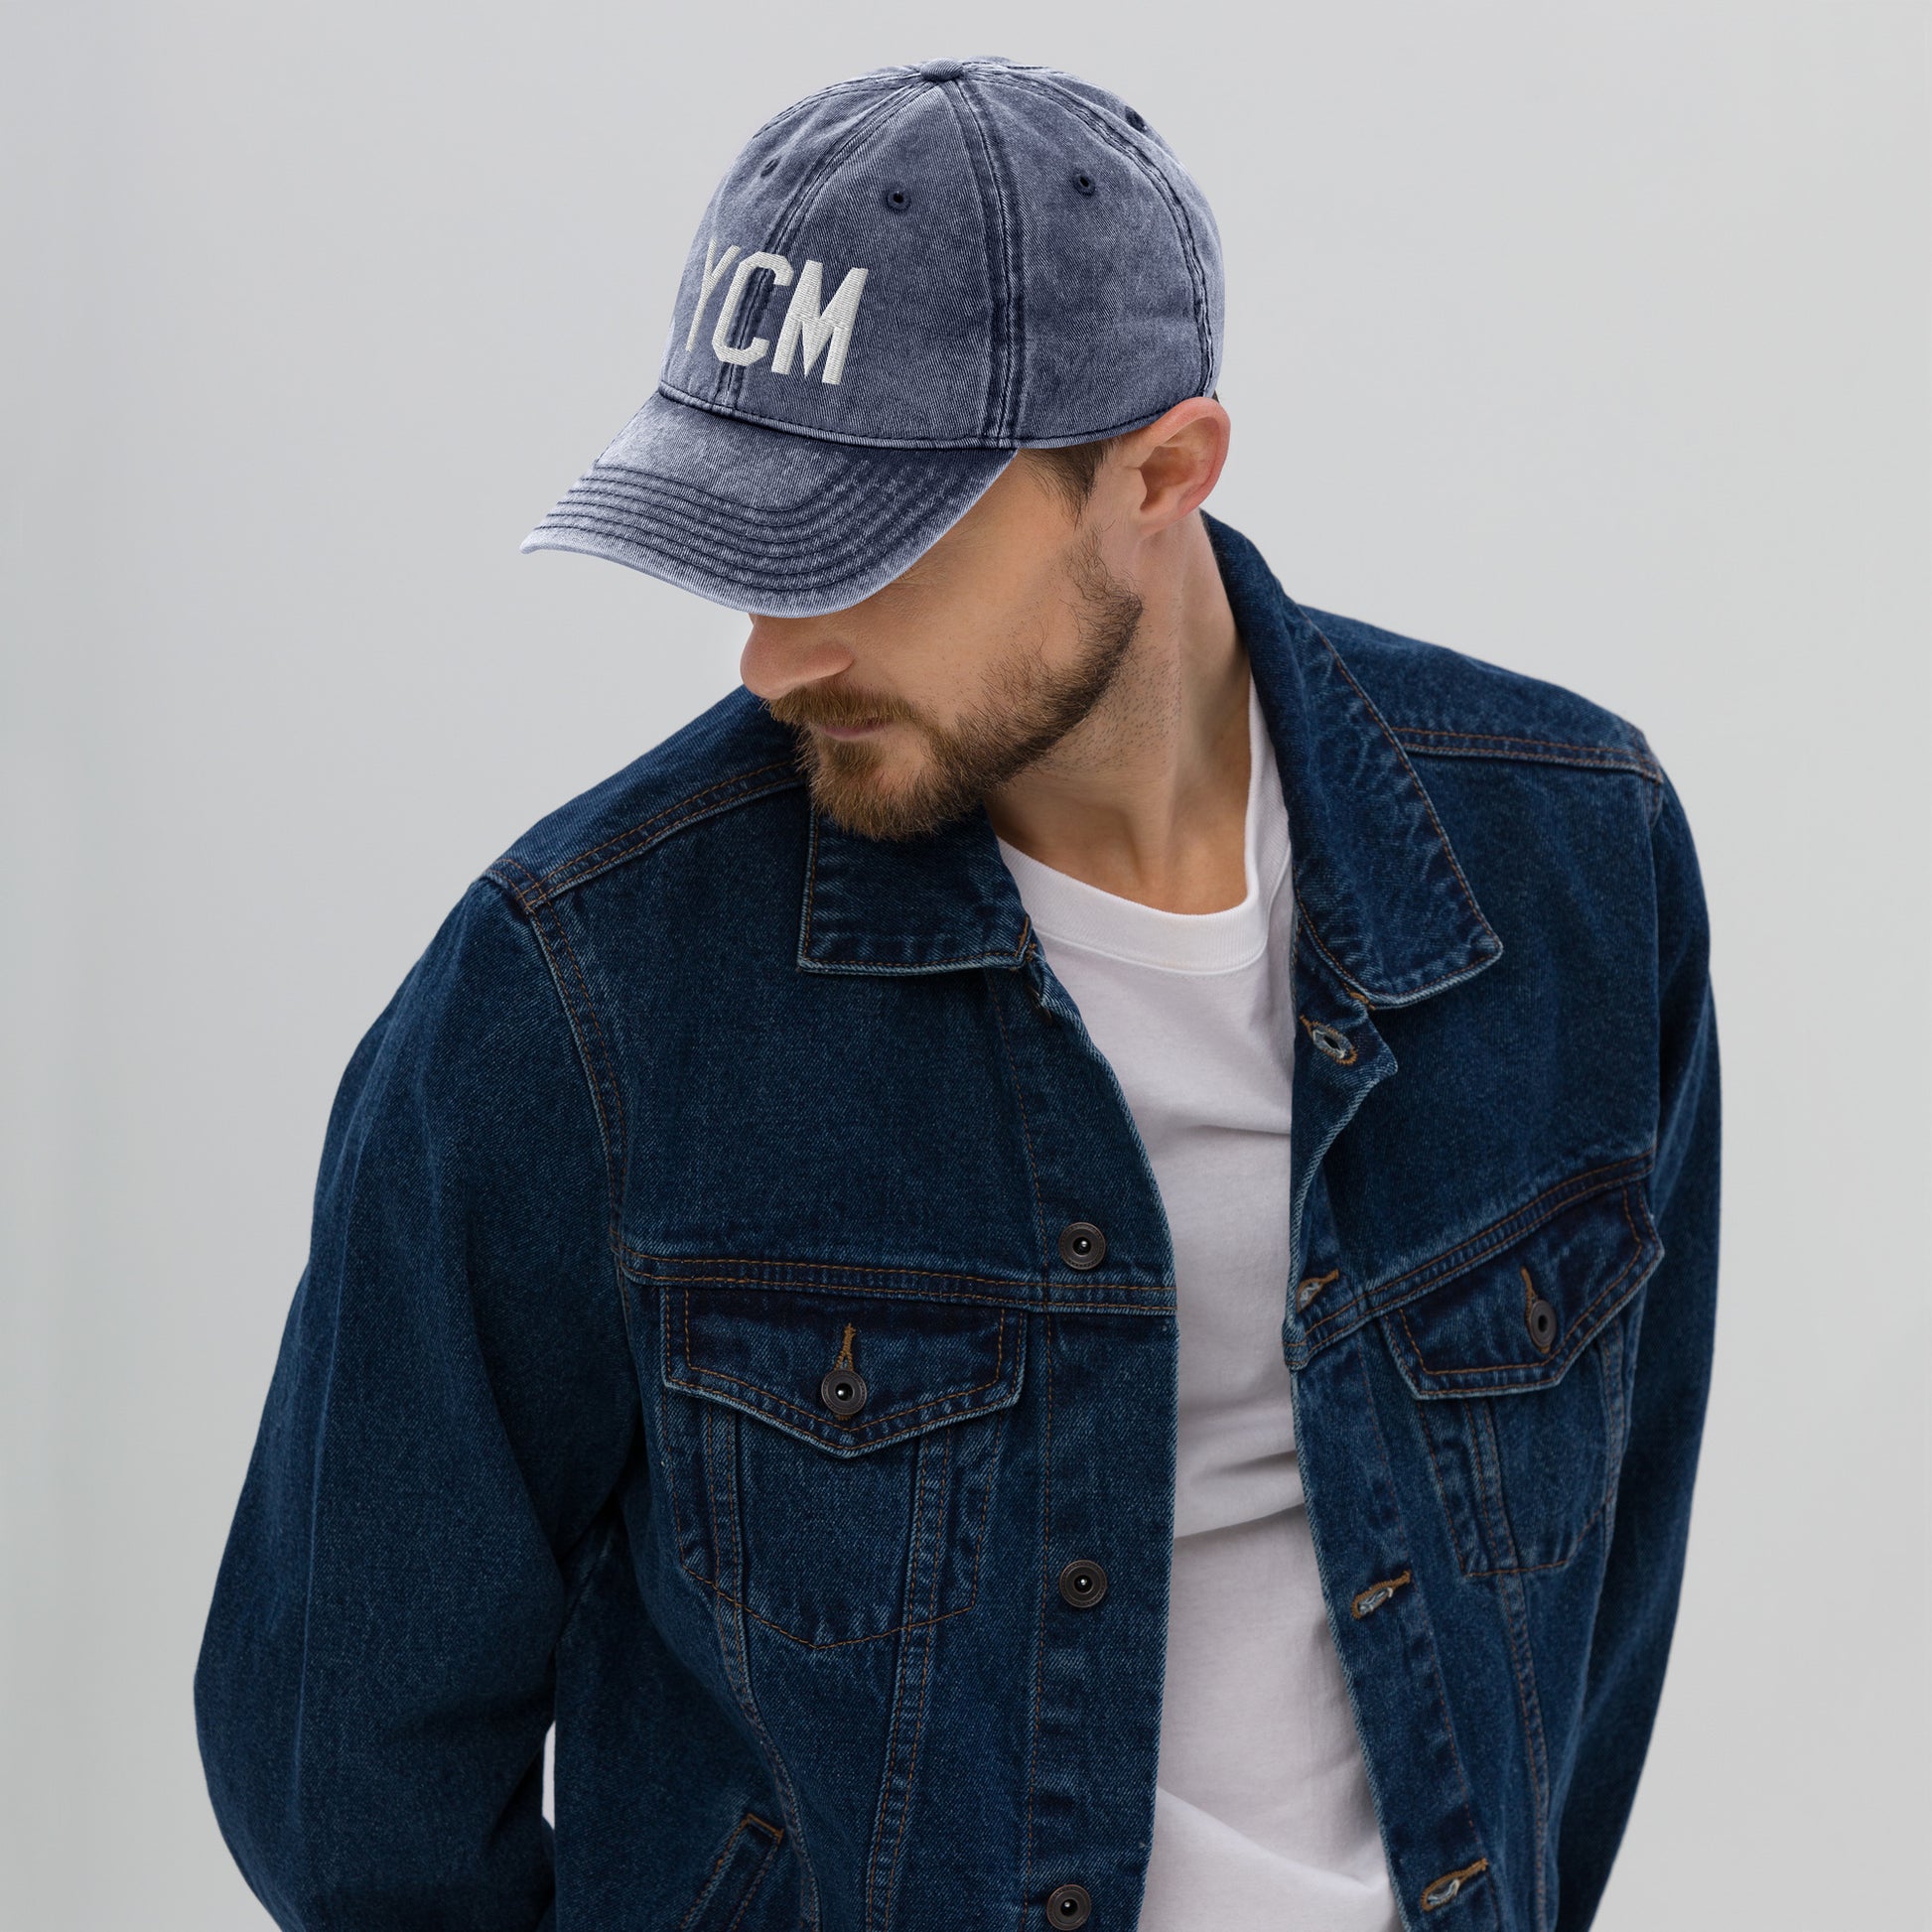 Airport Code Twill Cap - White • YCM St. Catharines • YHM Designs - Image 04